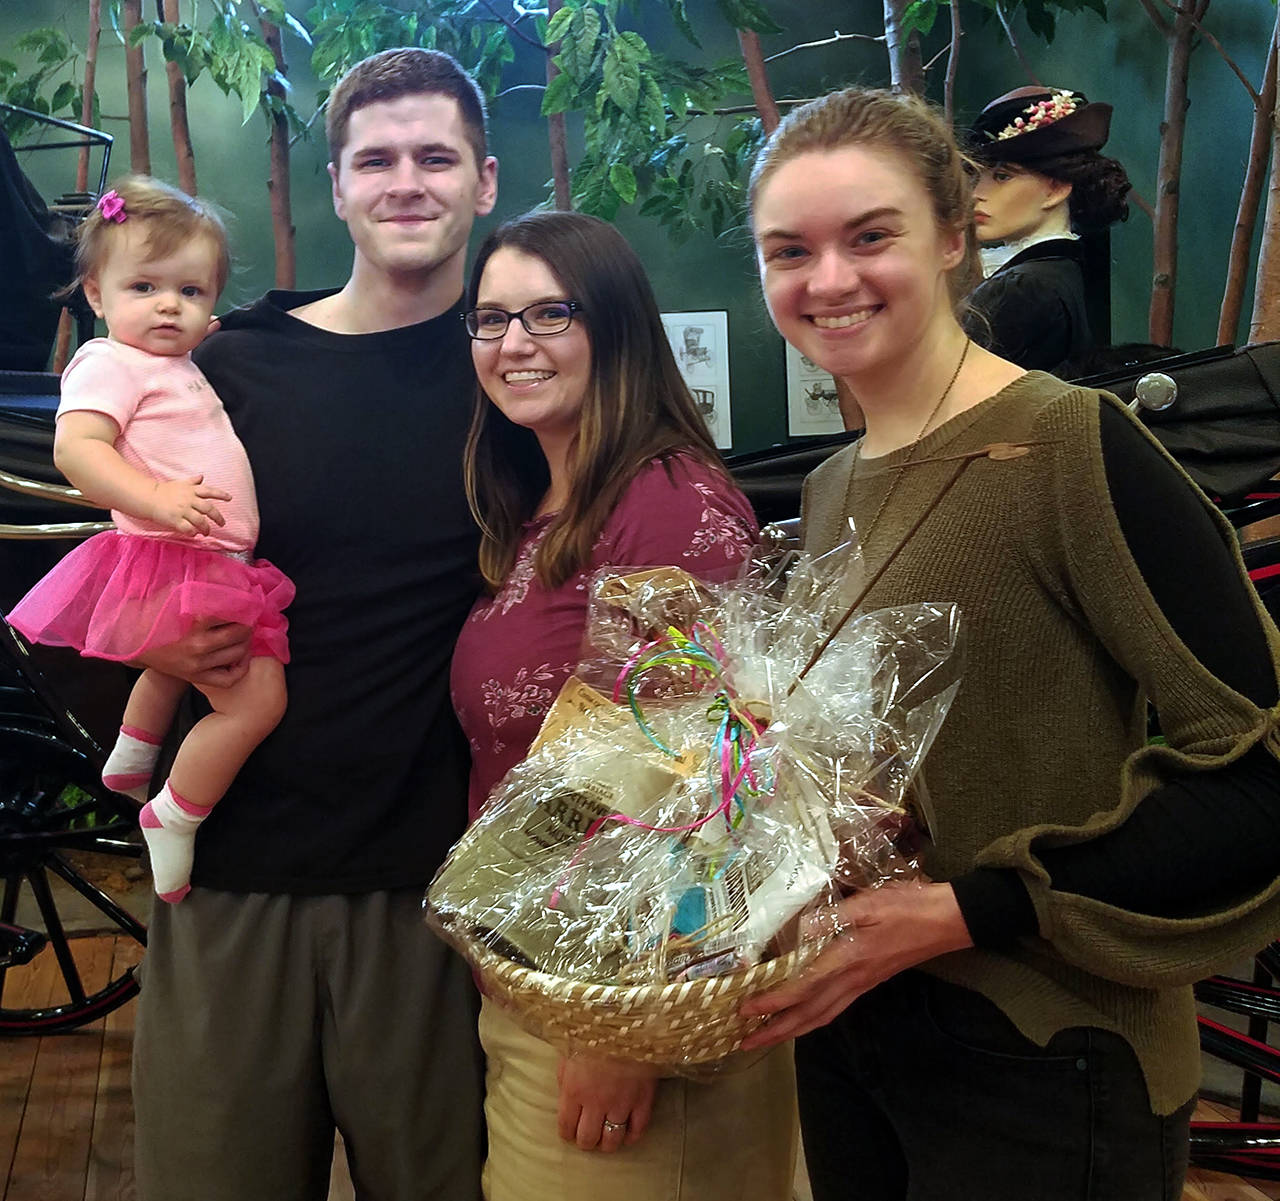 Mary Cooley, right, gives a gift basket to Anastasia Becraft, the museum’s 75,000th visitor, who was there Sept. 21 with her husband, Raymond, and their daughter, Loretta.